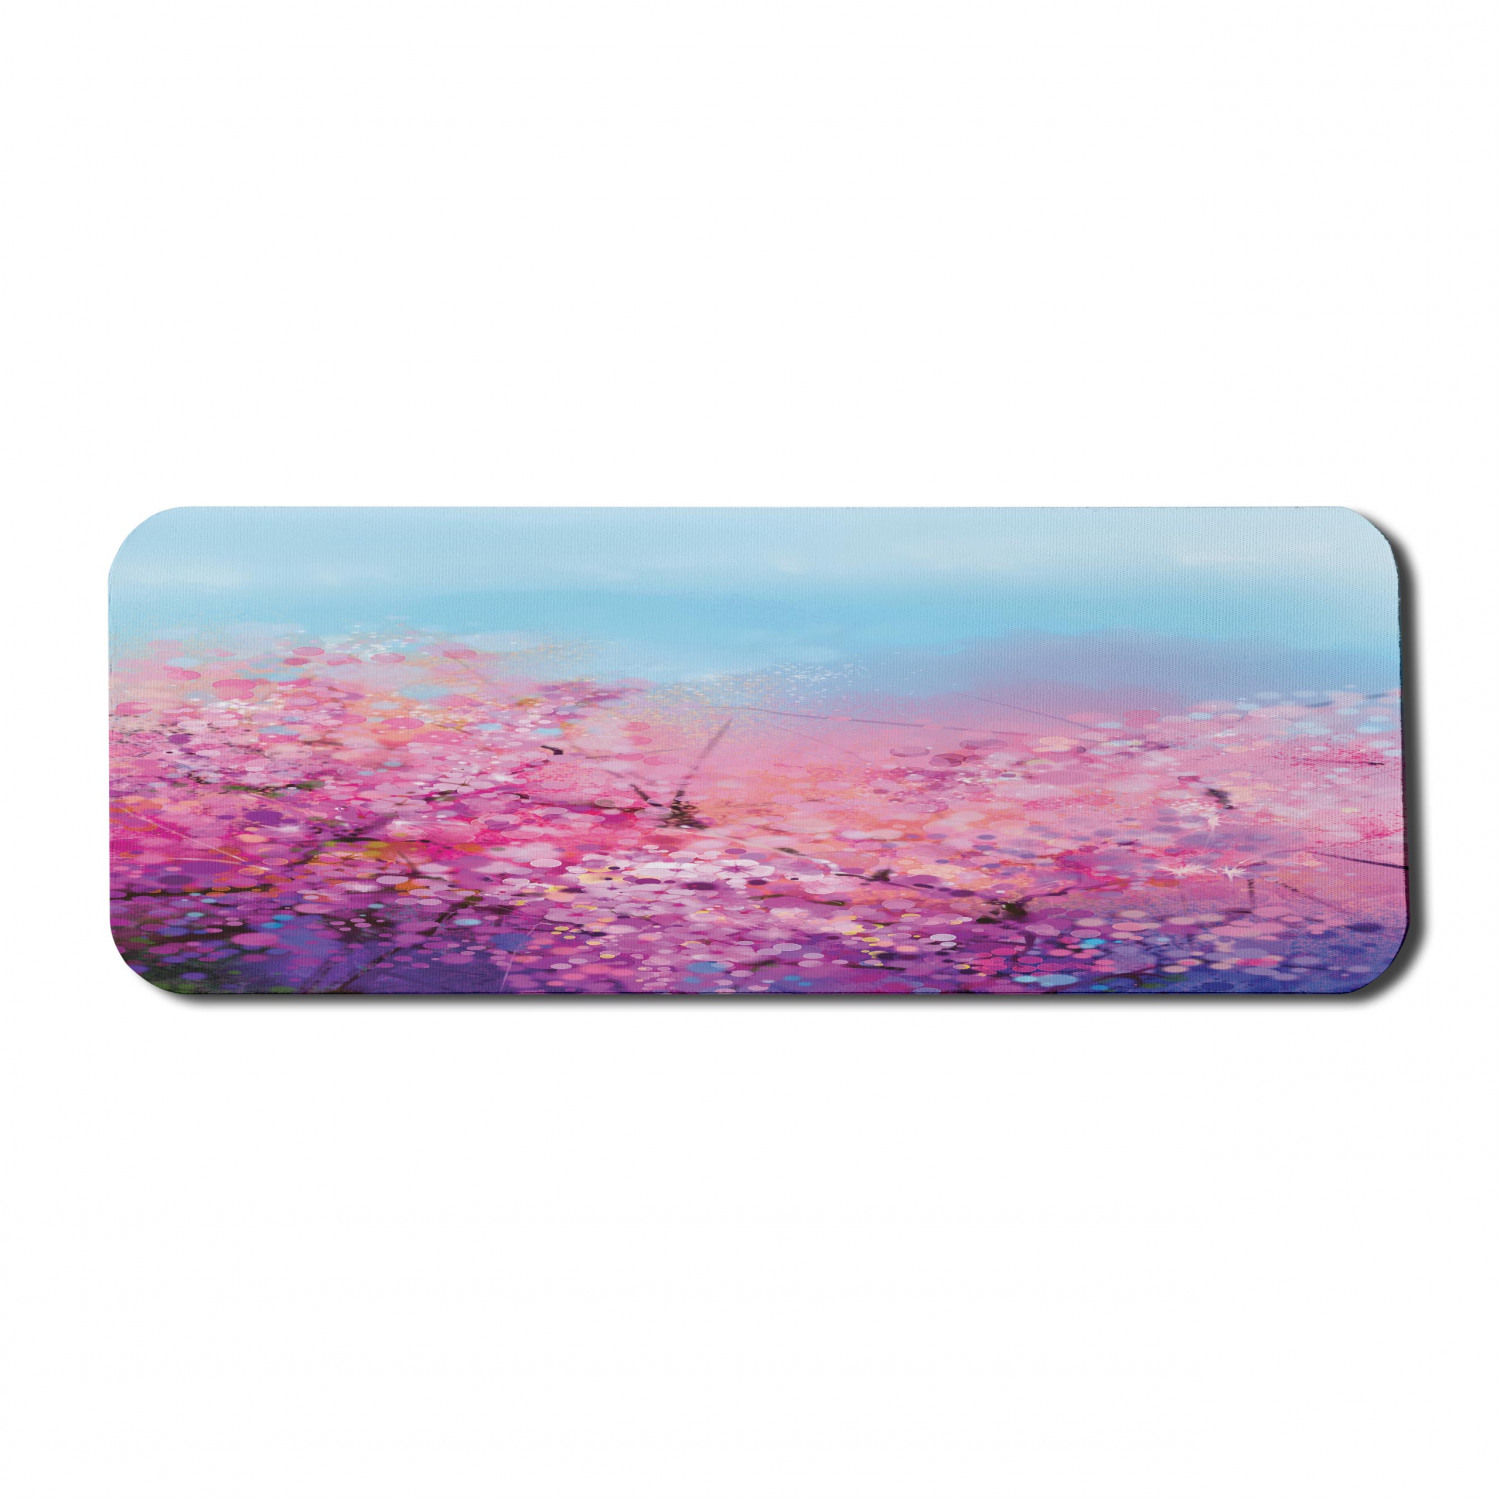 Flower Computer Mouse Pad, Sakura Blossom Floral Beauty with Sky Japanese Inspired Cherry Spring Theme, Rectangle Non-Slip Rubber Mousepad Large, 31" x 12" Gaming Size, Purple Pale Blue, by Ambesonne - image 1 of 2